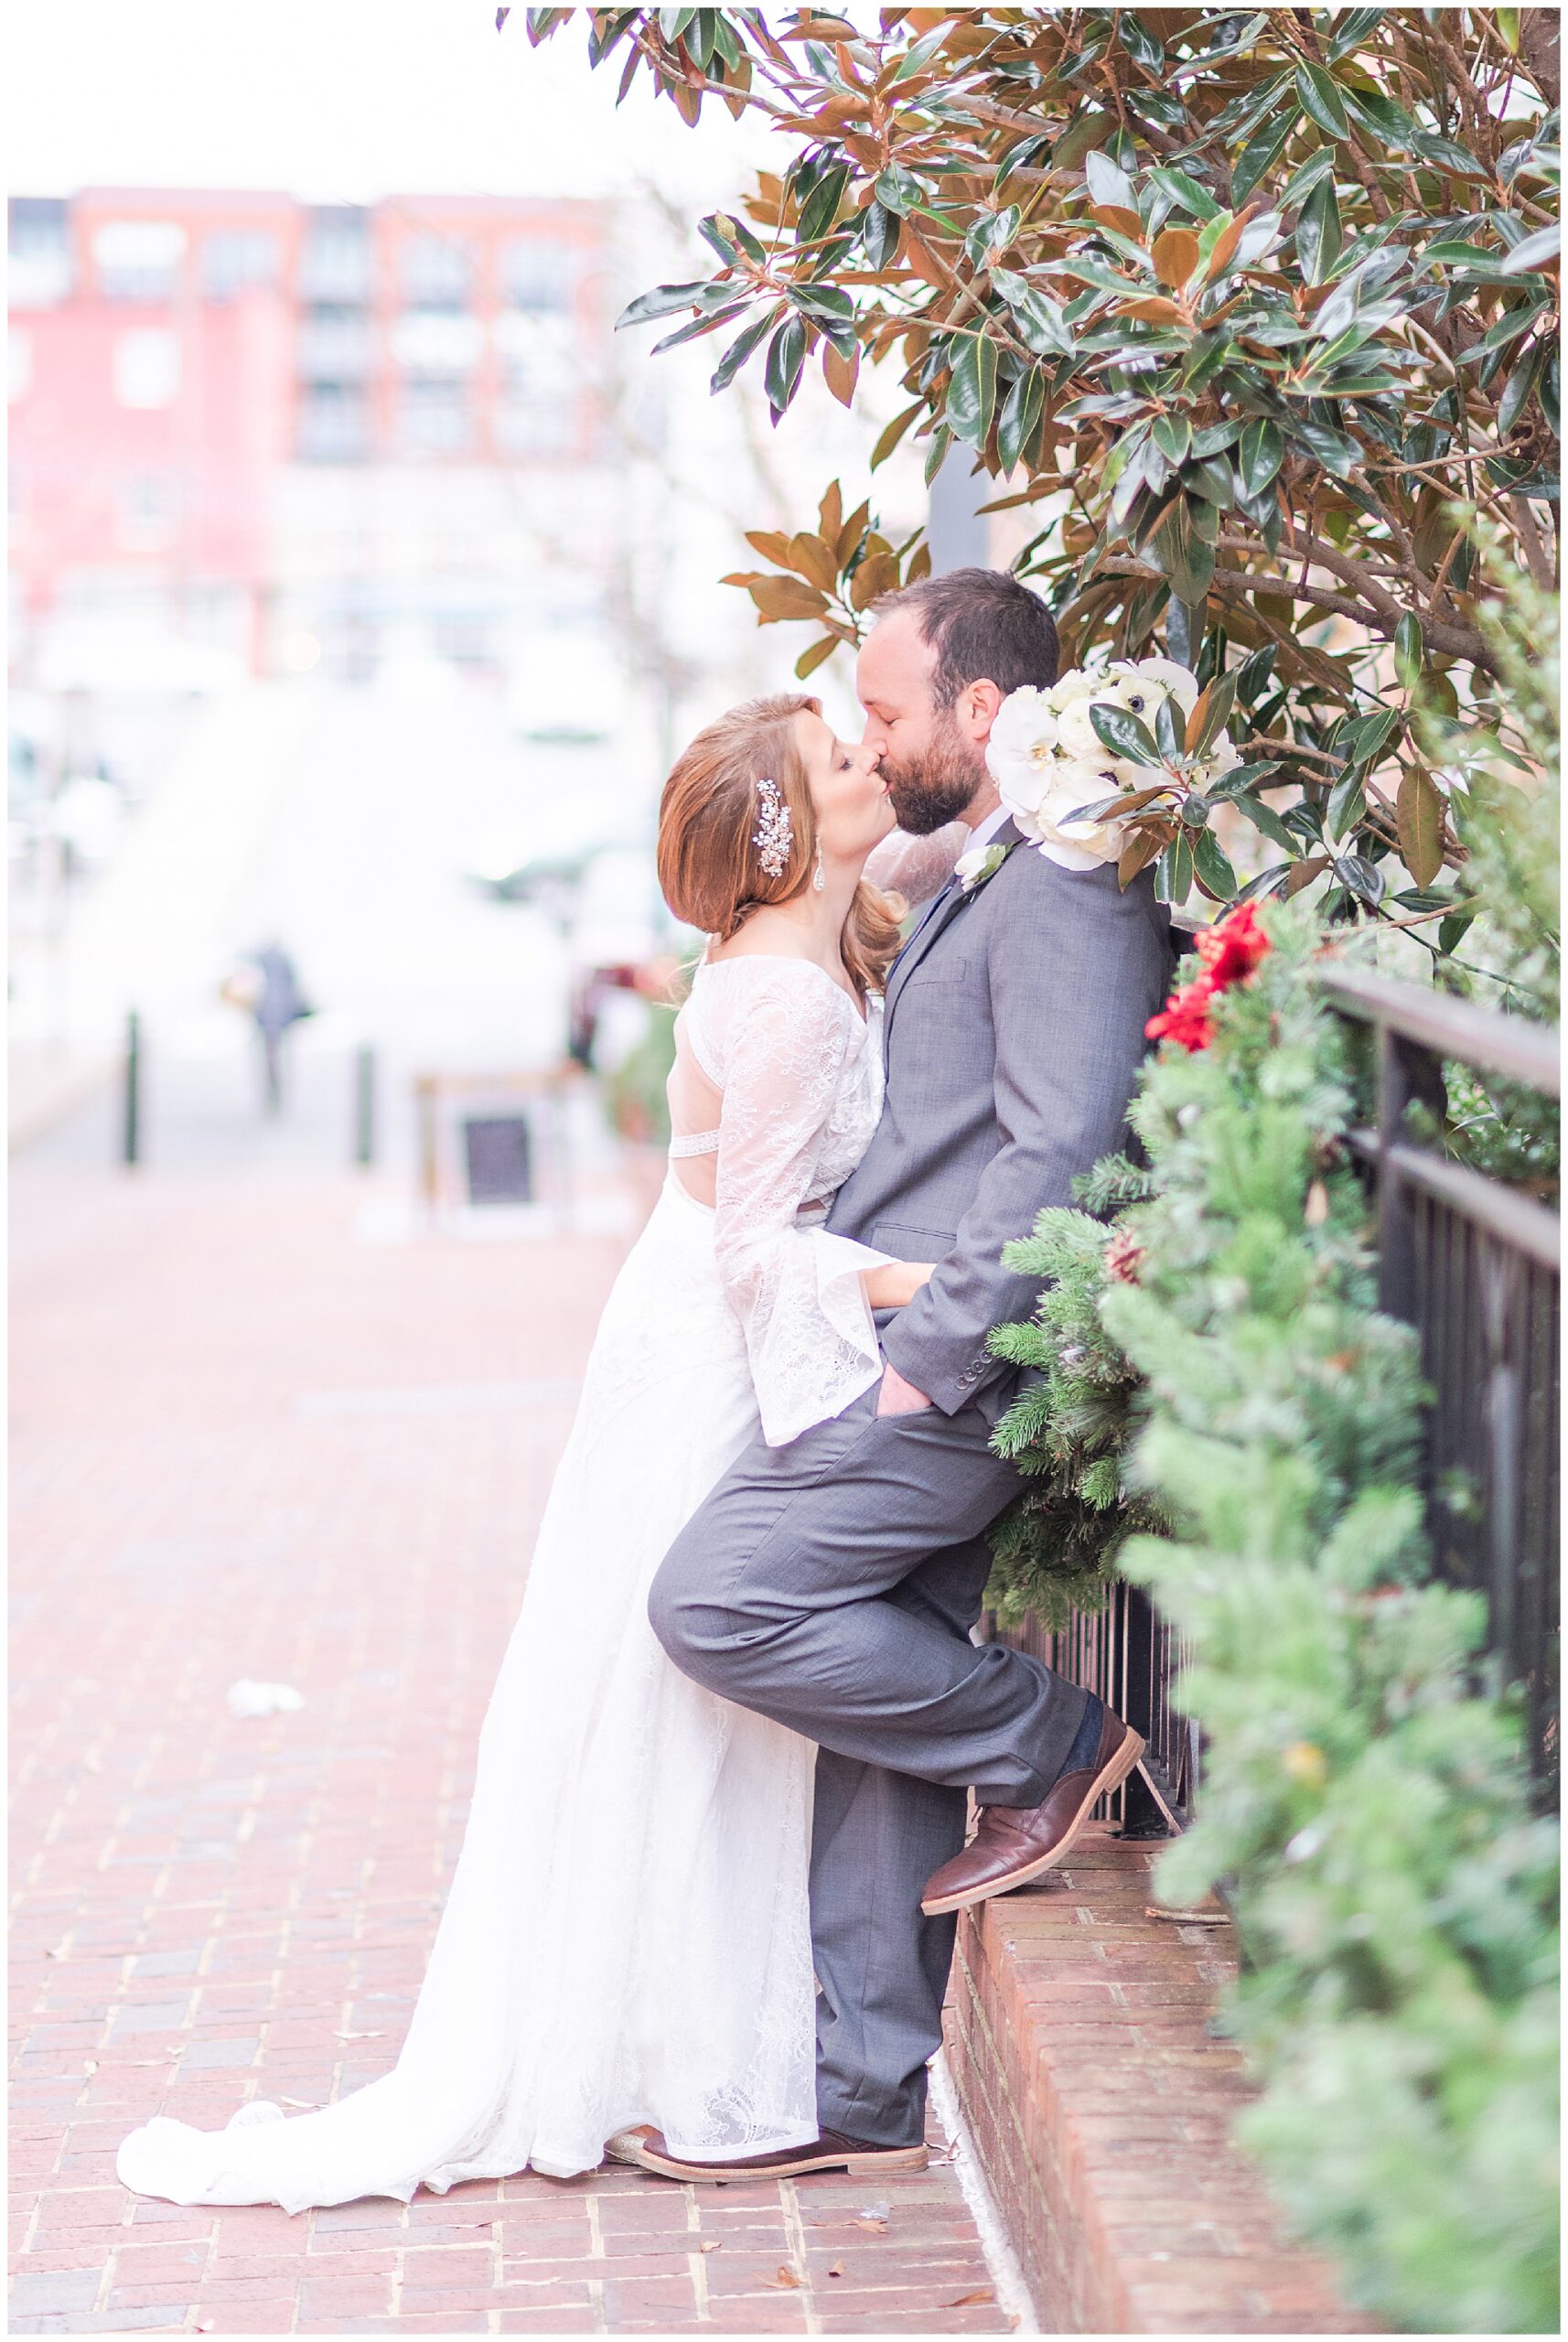 Couple sharing a kiss in Charlottesville, Virginia during the wintertime at the Downtown Mall.